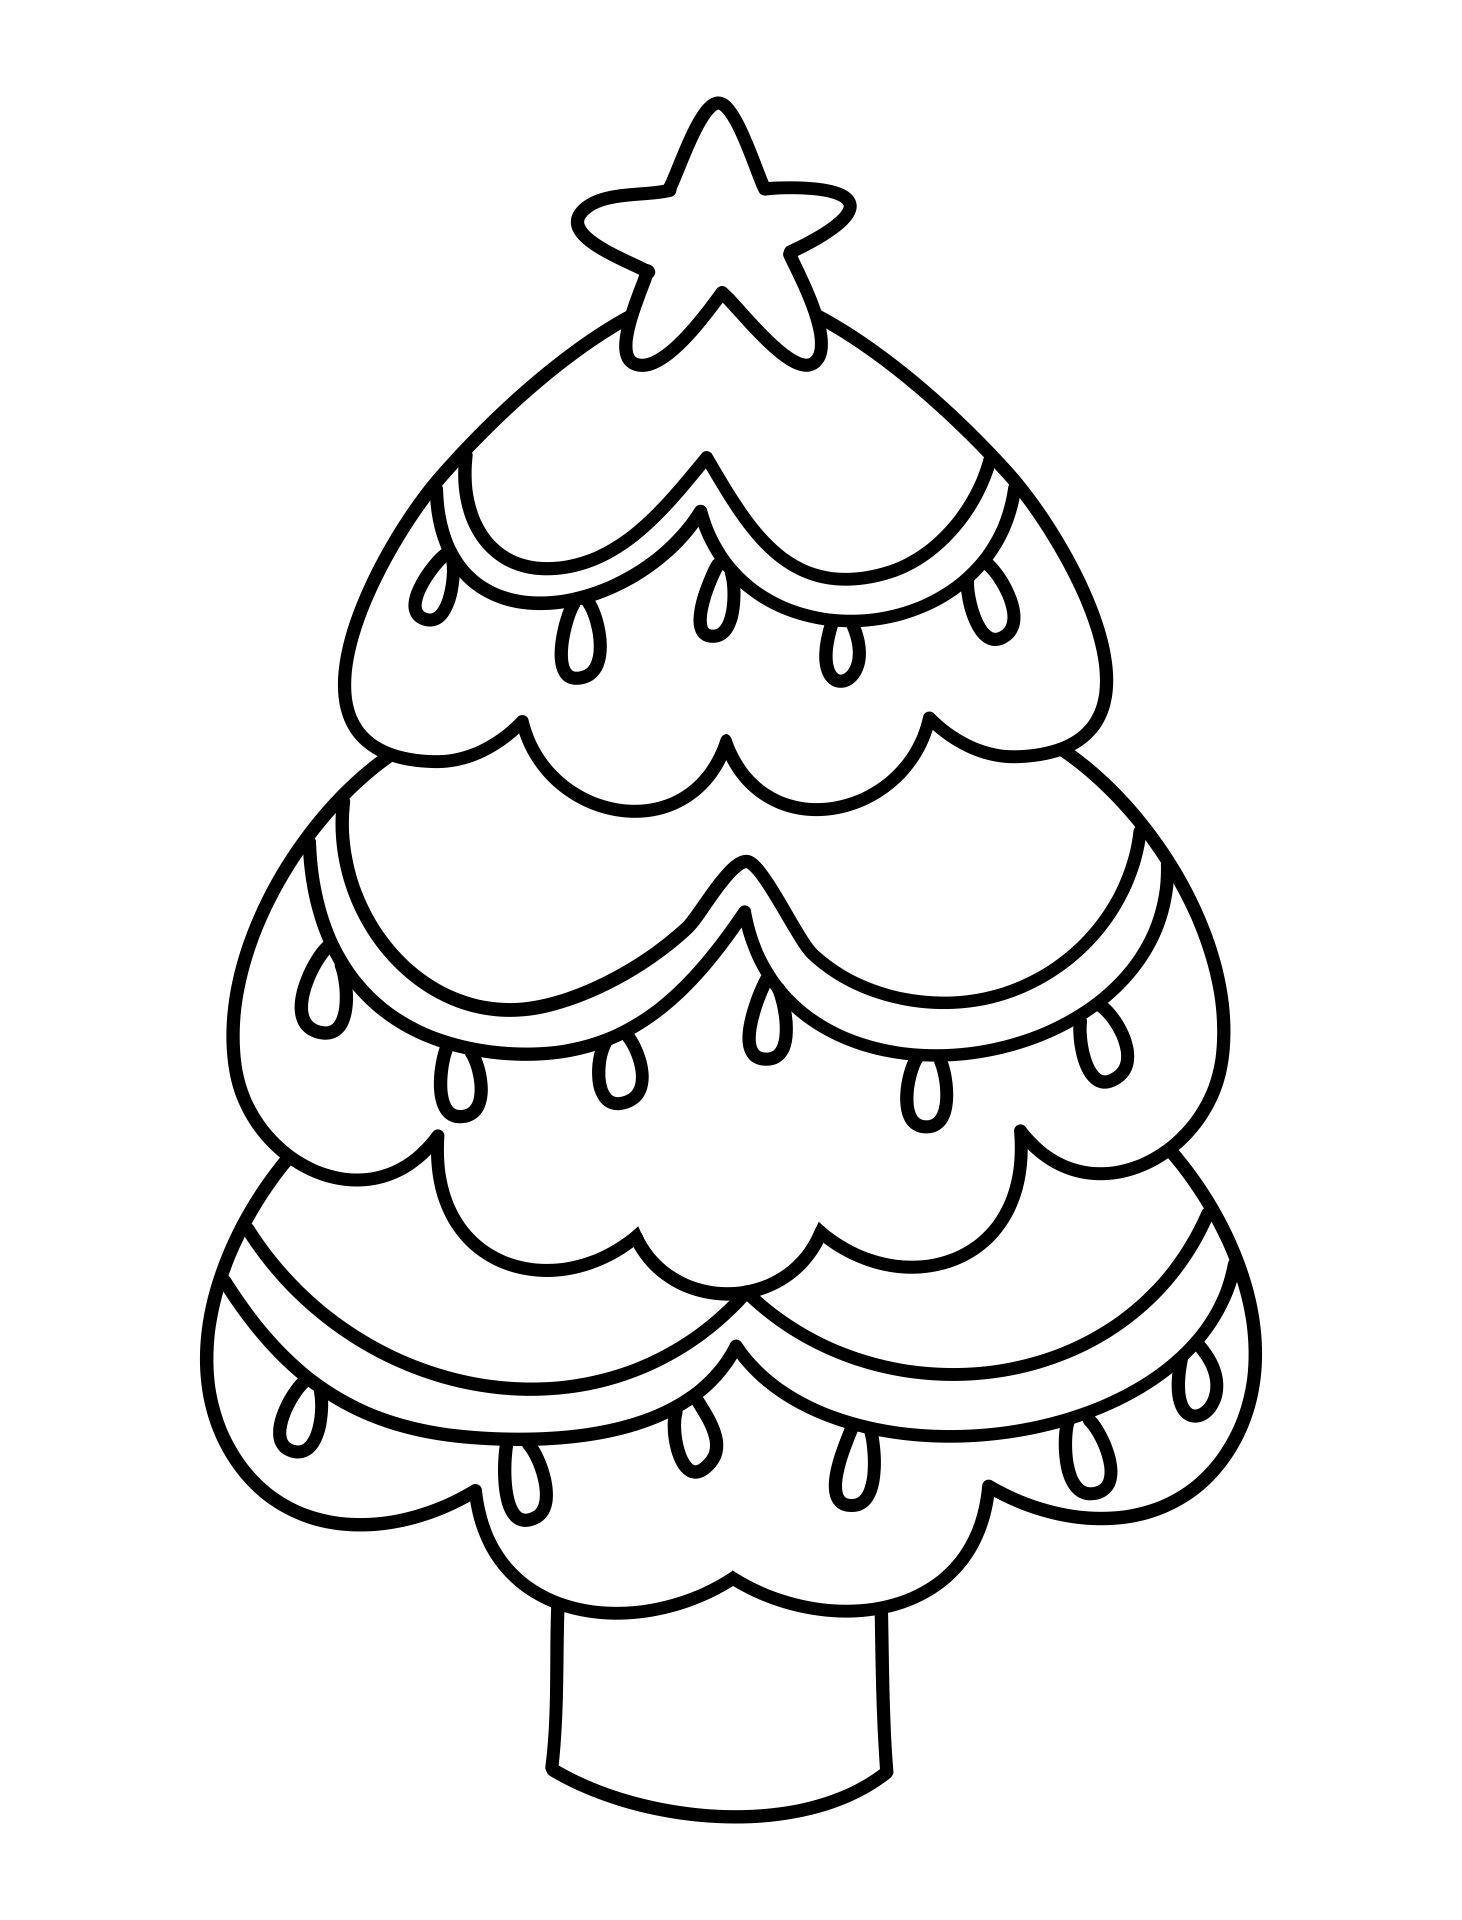 Christmas Tree Outline Coloring Pages